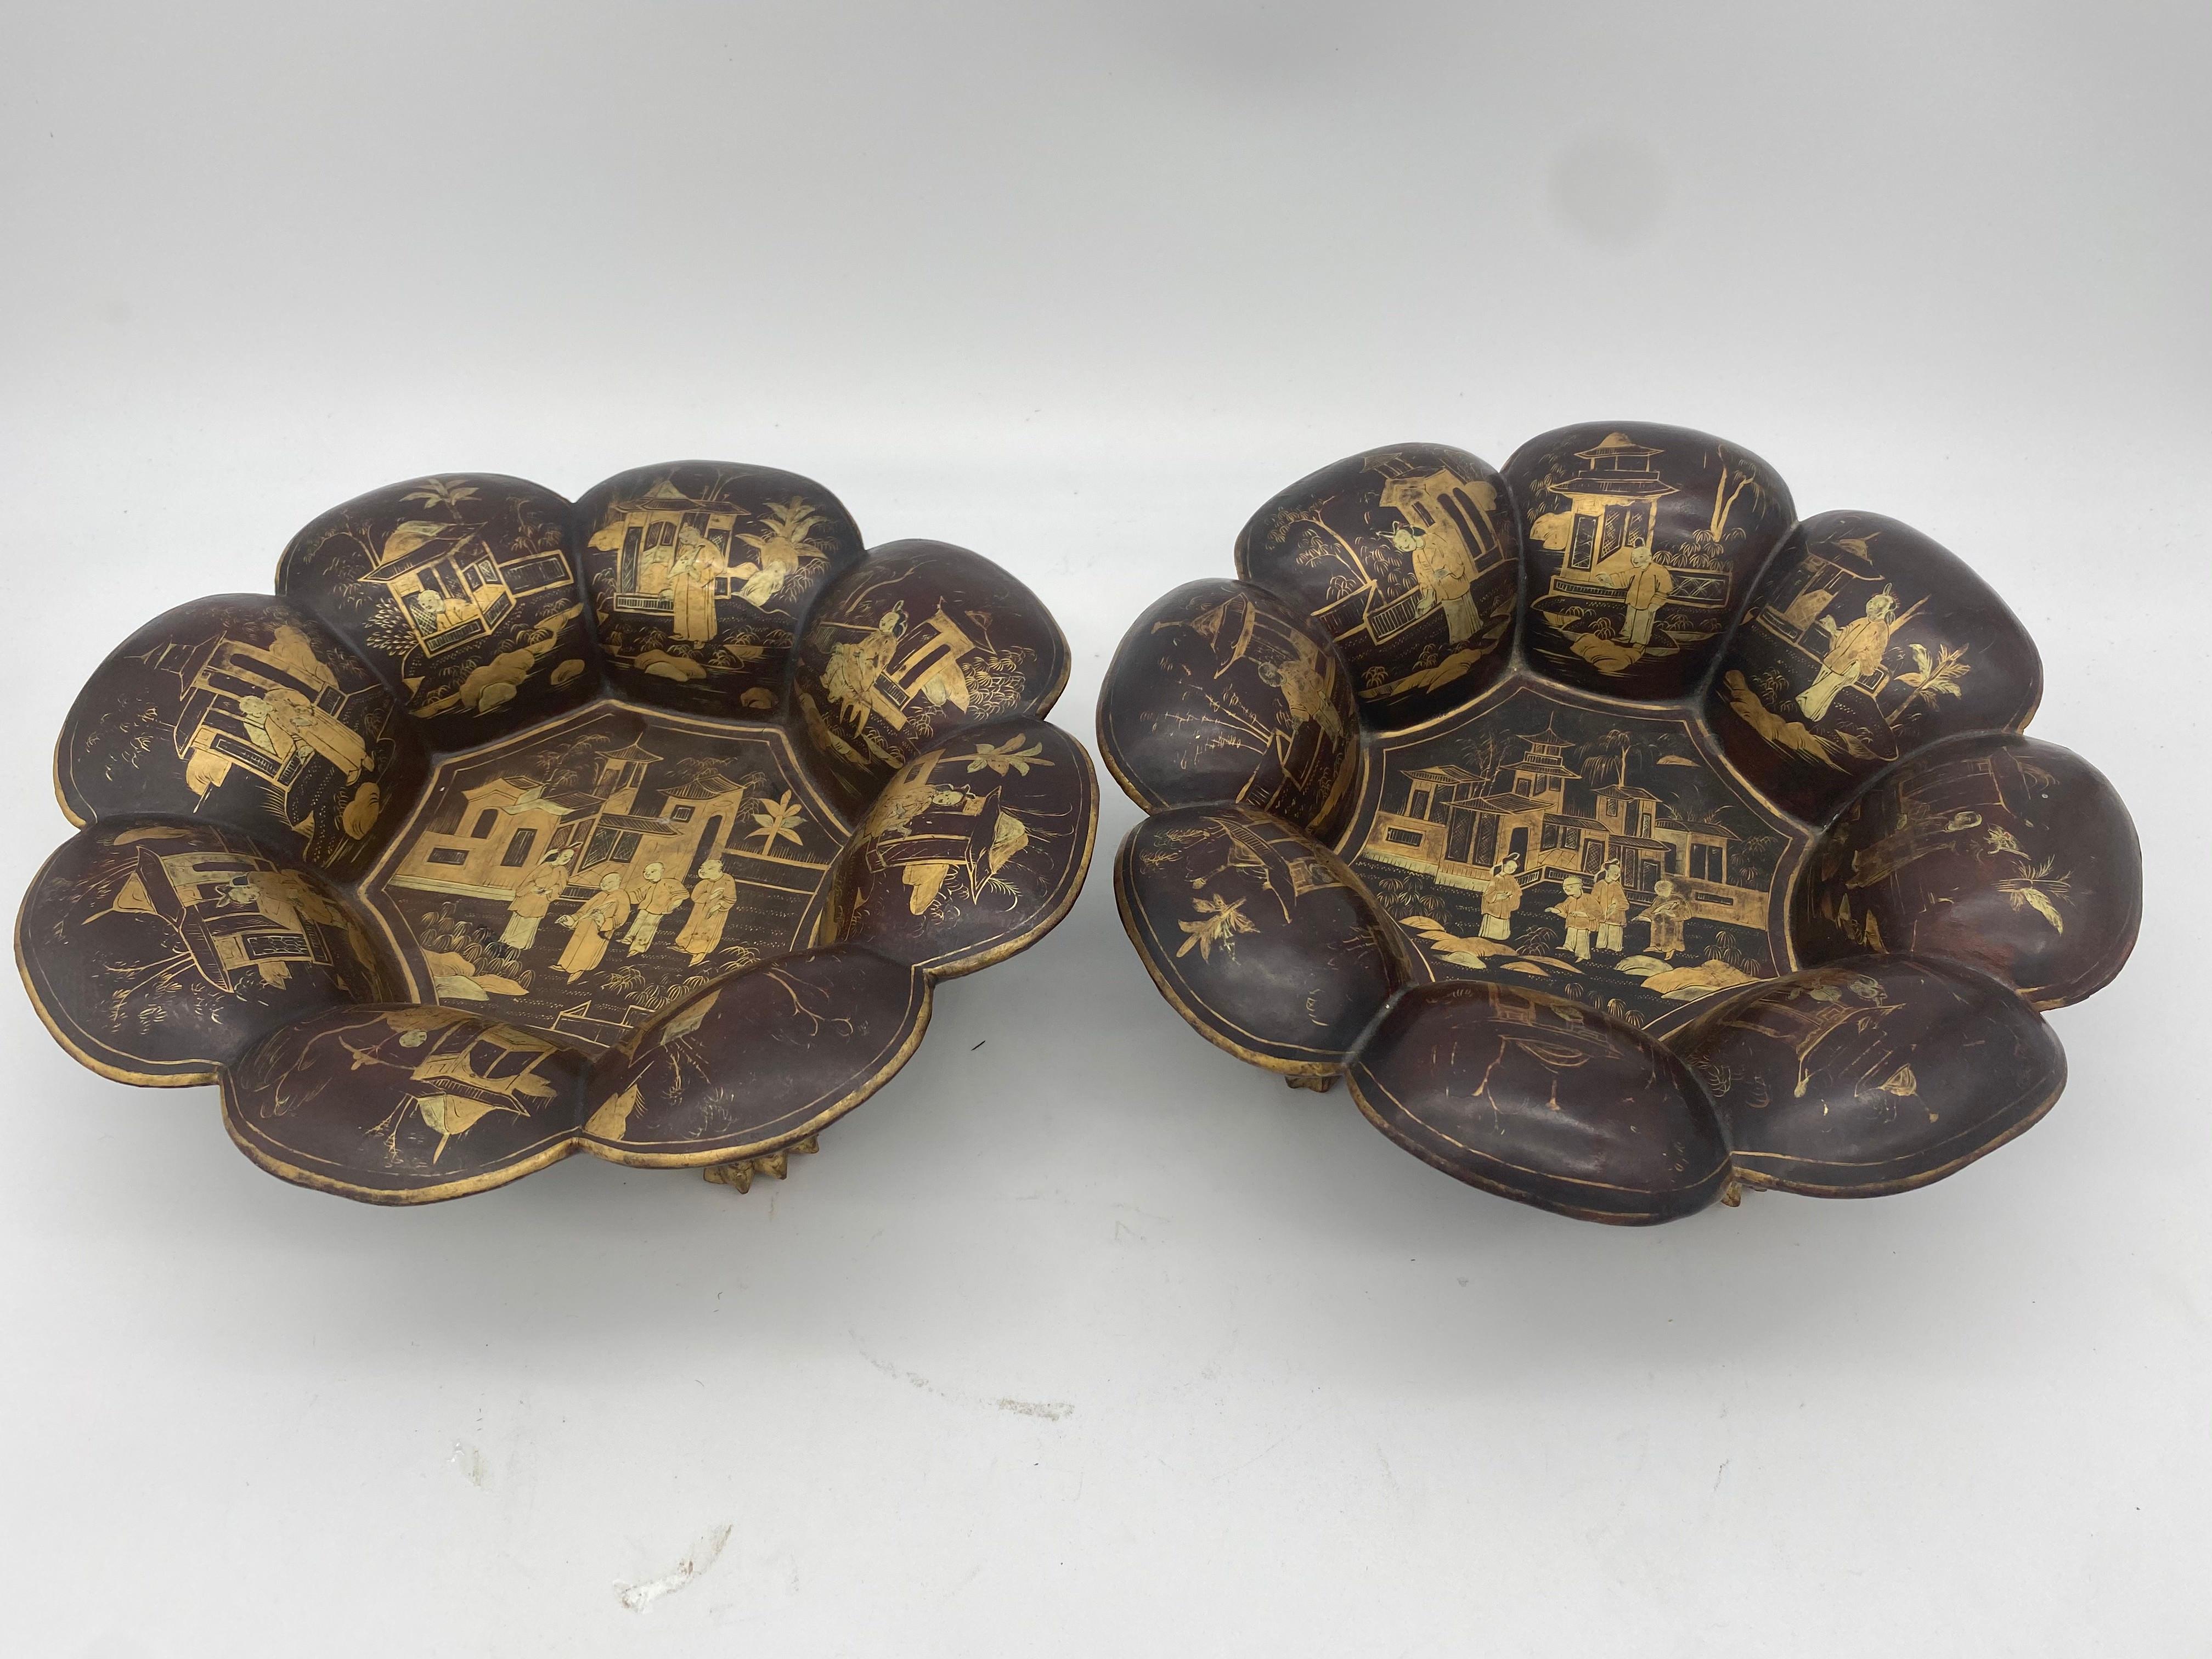 19th century a pair of lift-lid gilt-decorated golden black lacquer Chinese plates, very beautiful pieces. every plate with 4 golden feet.